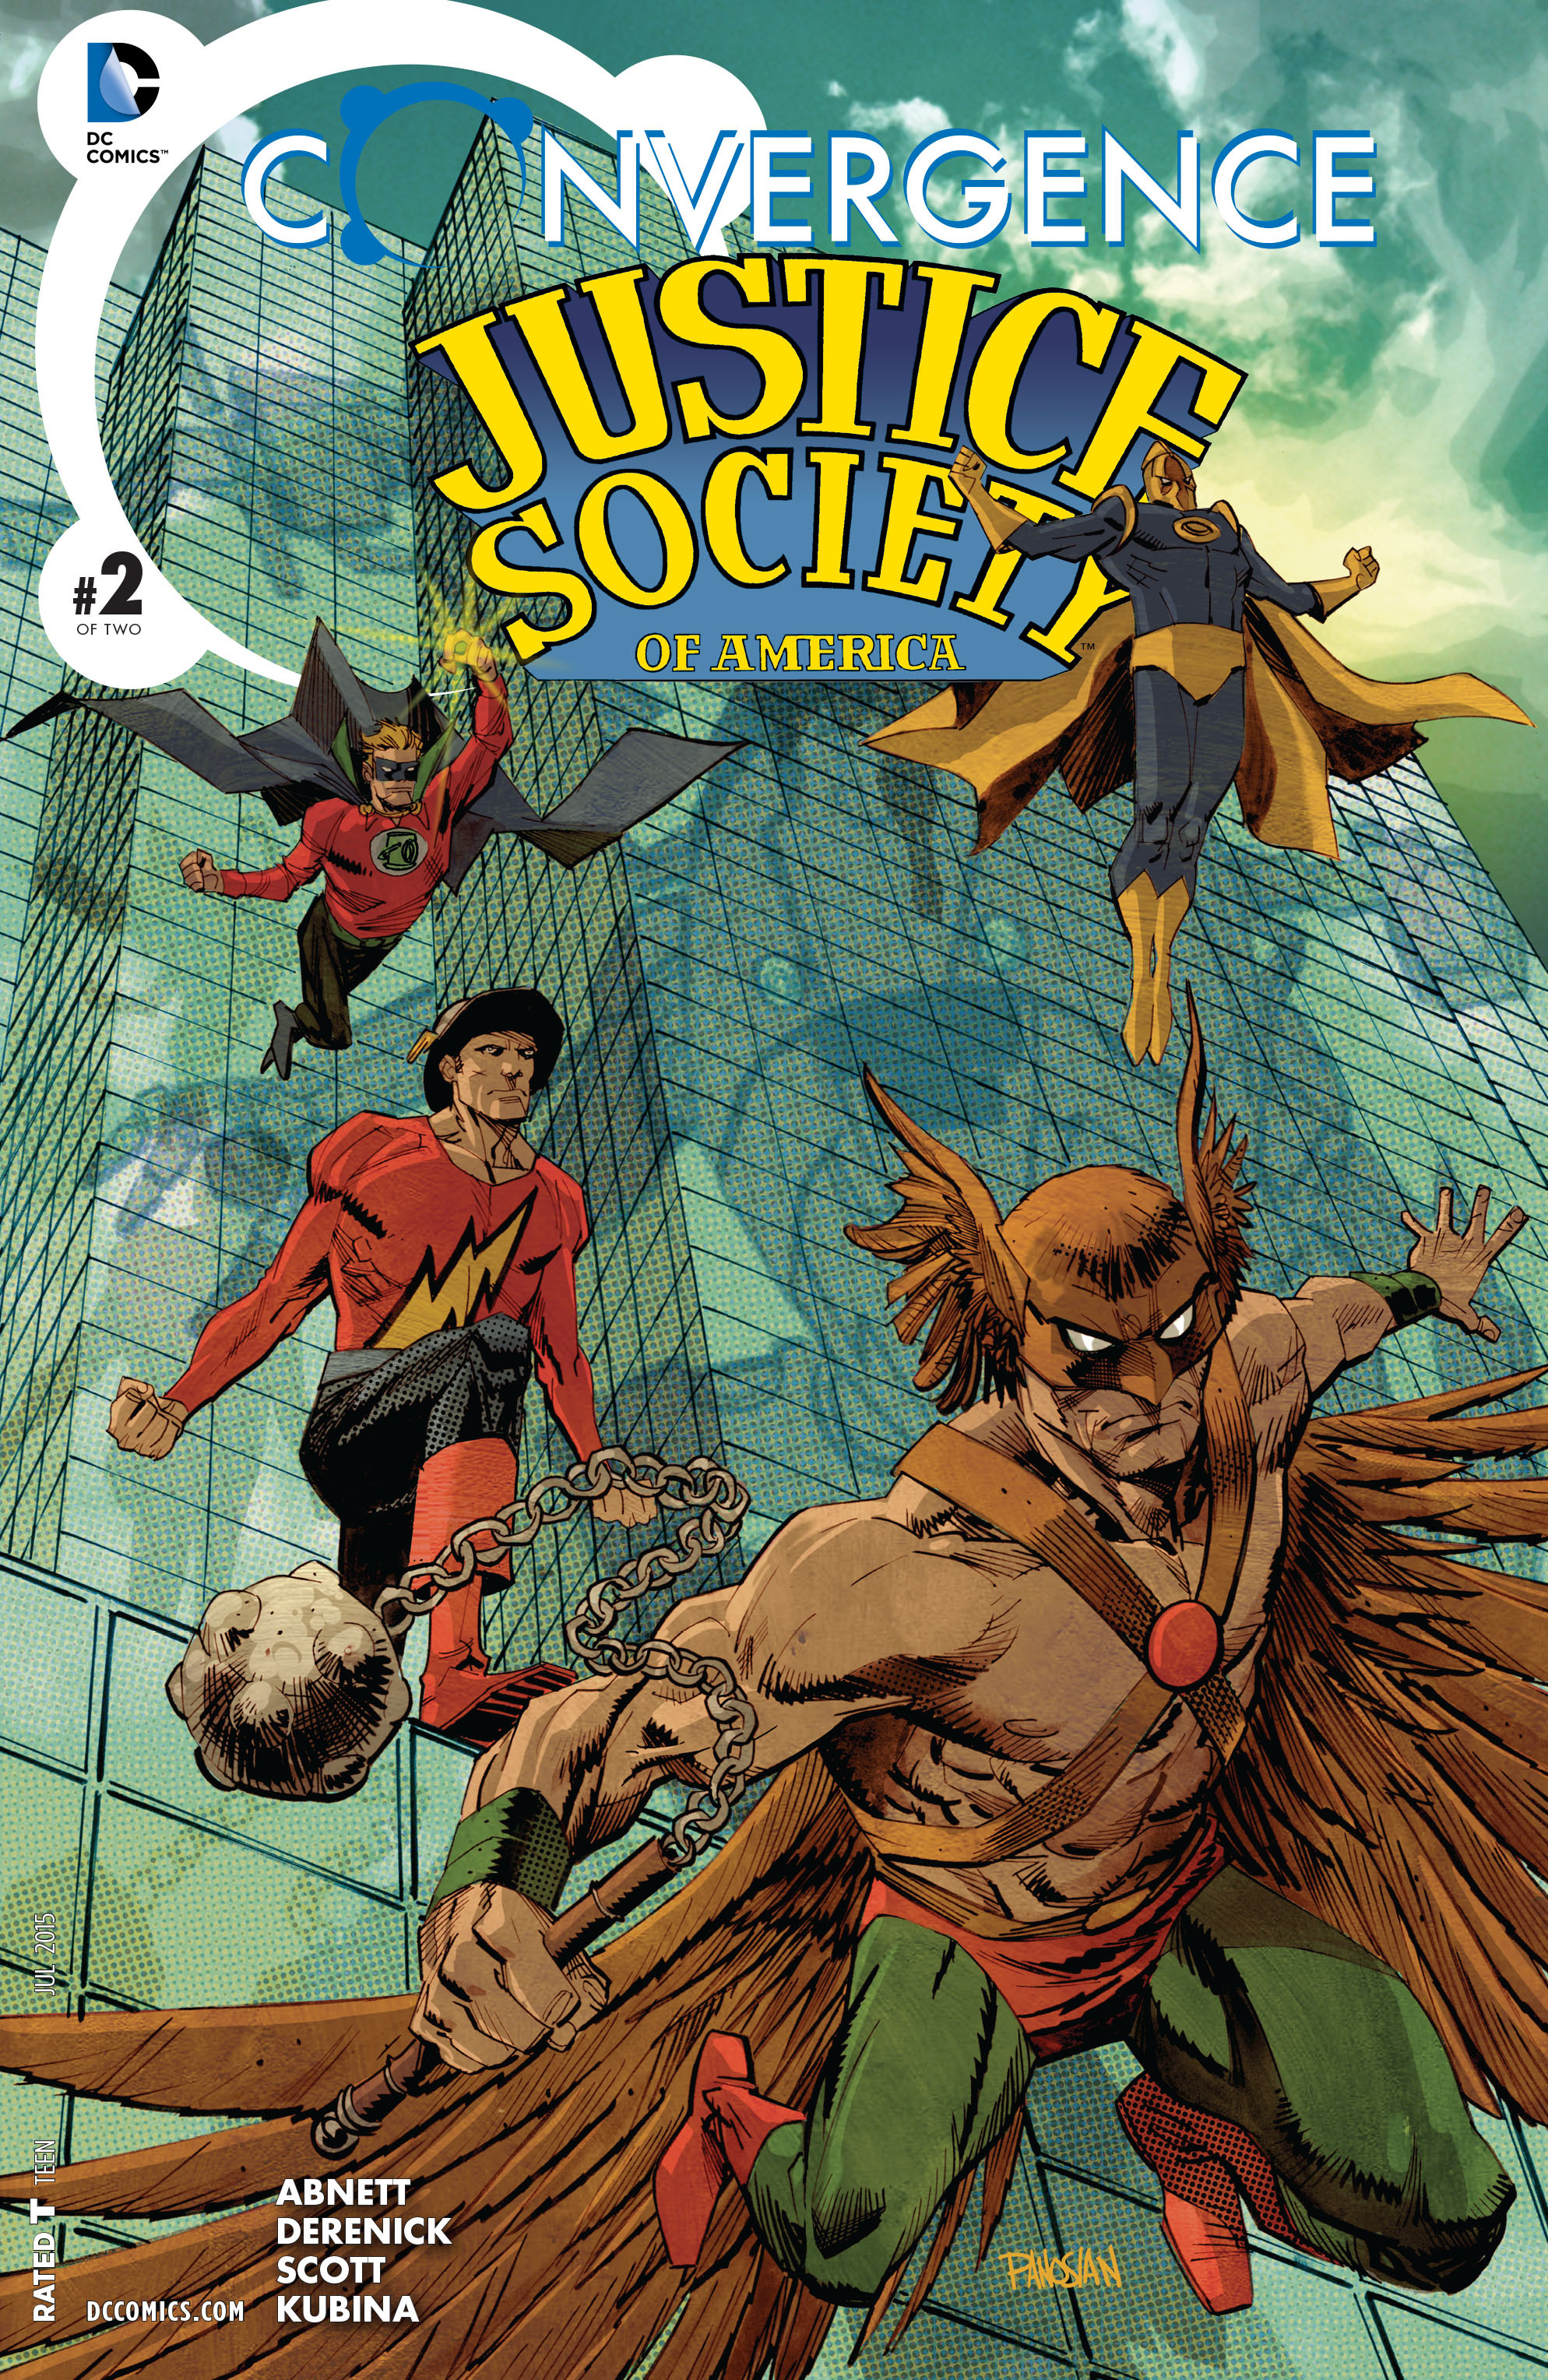 Read online Convergence Justice Society of America comic -  Issue #2 - 1